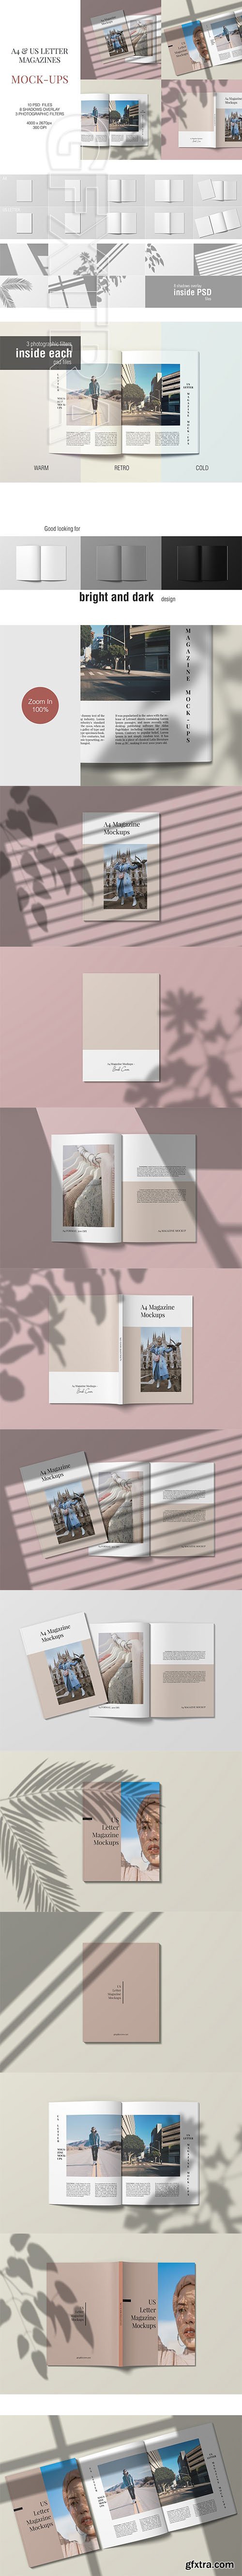 CreativeMarket - A4 and US Letter Magazine Mockups 3710369